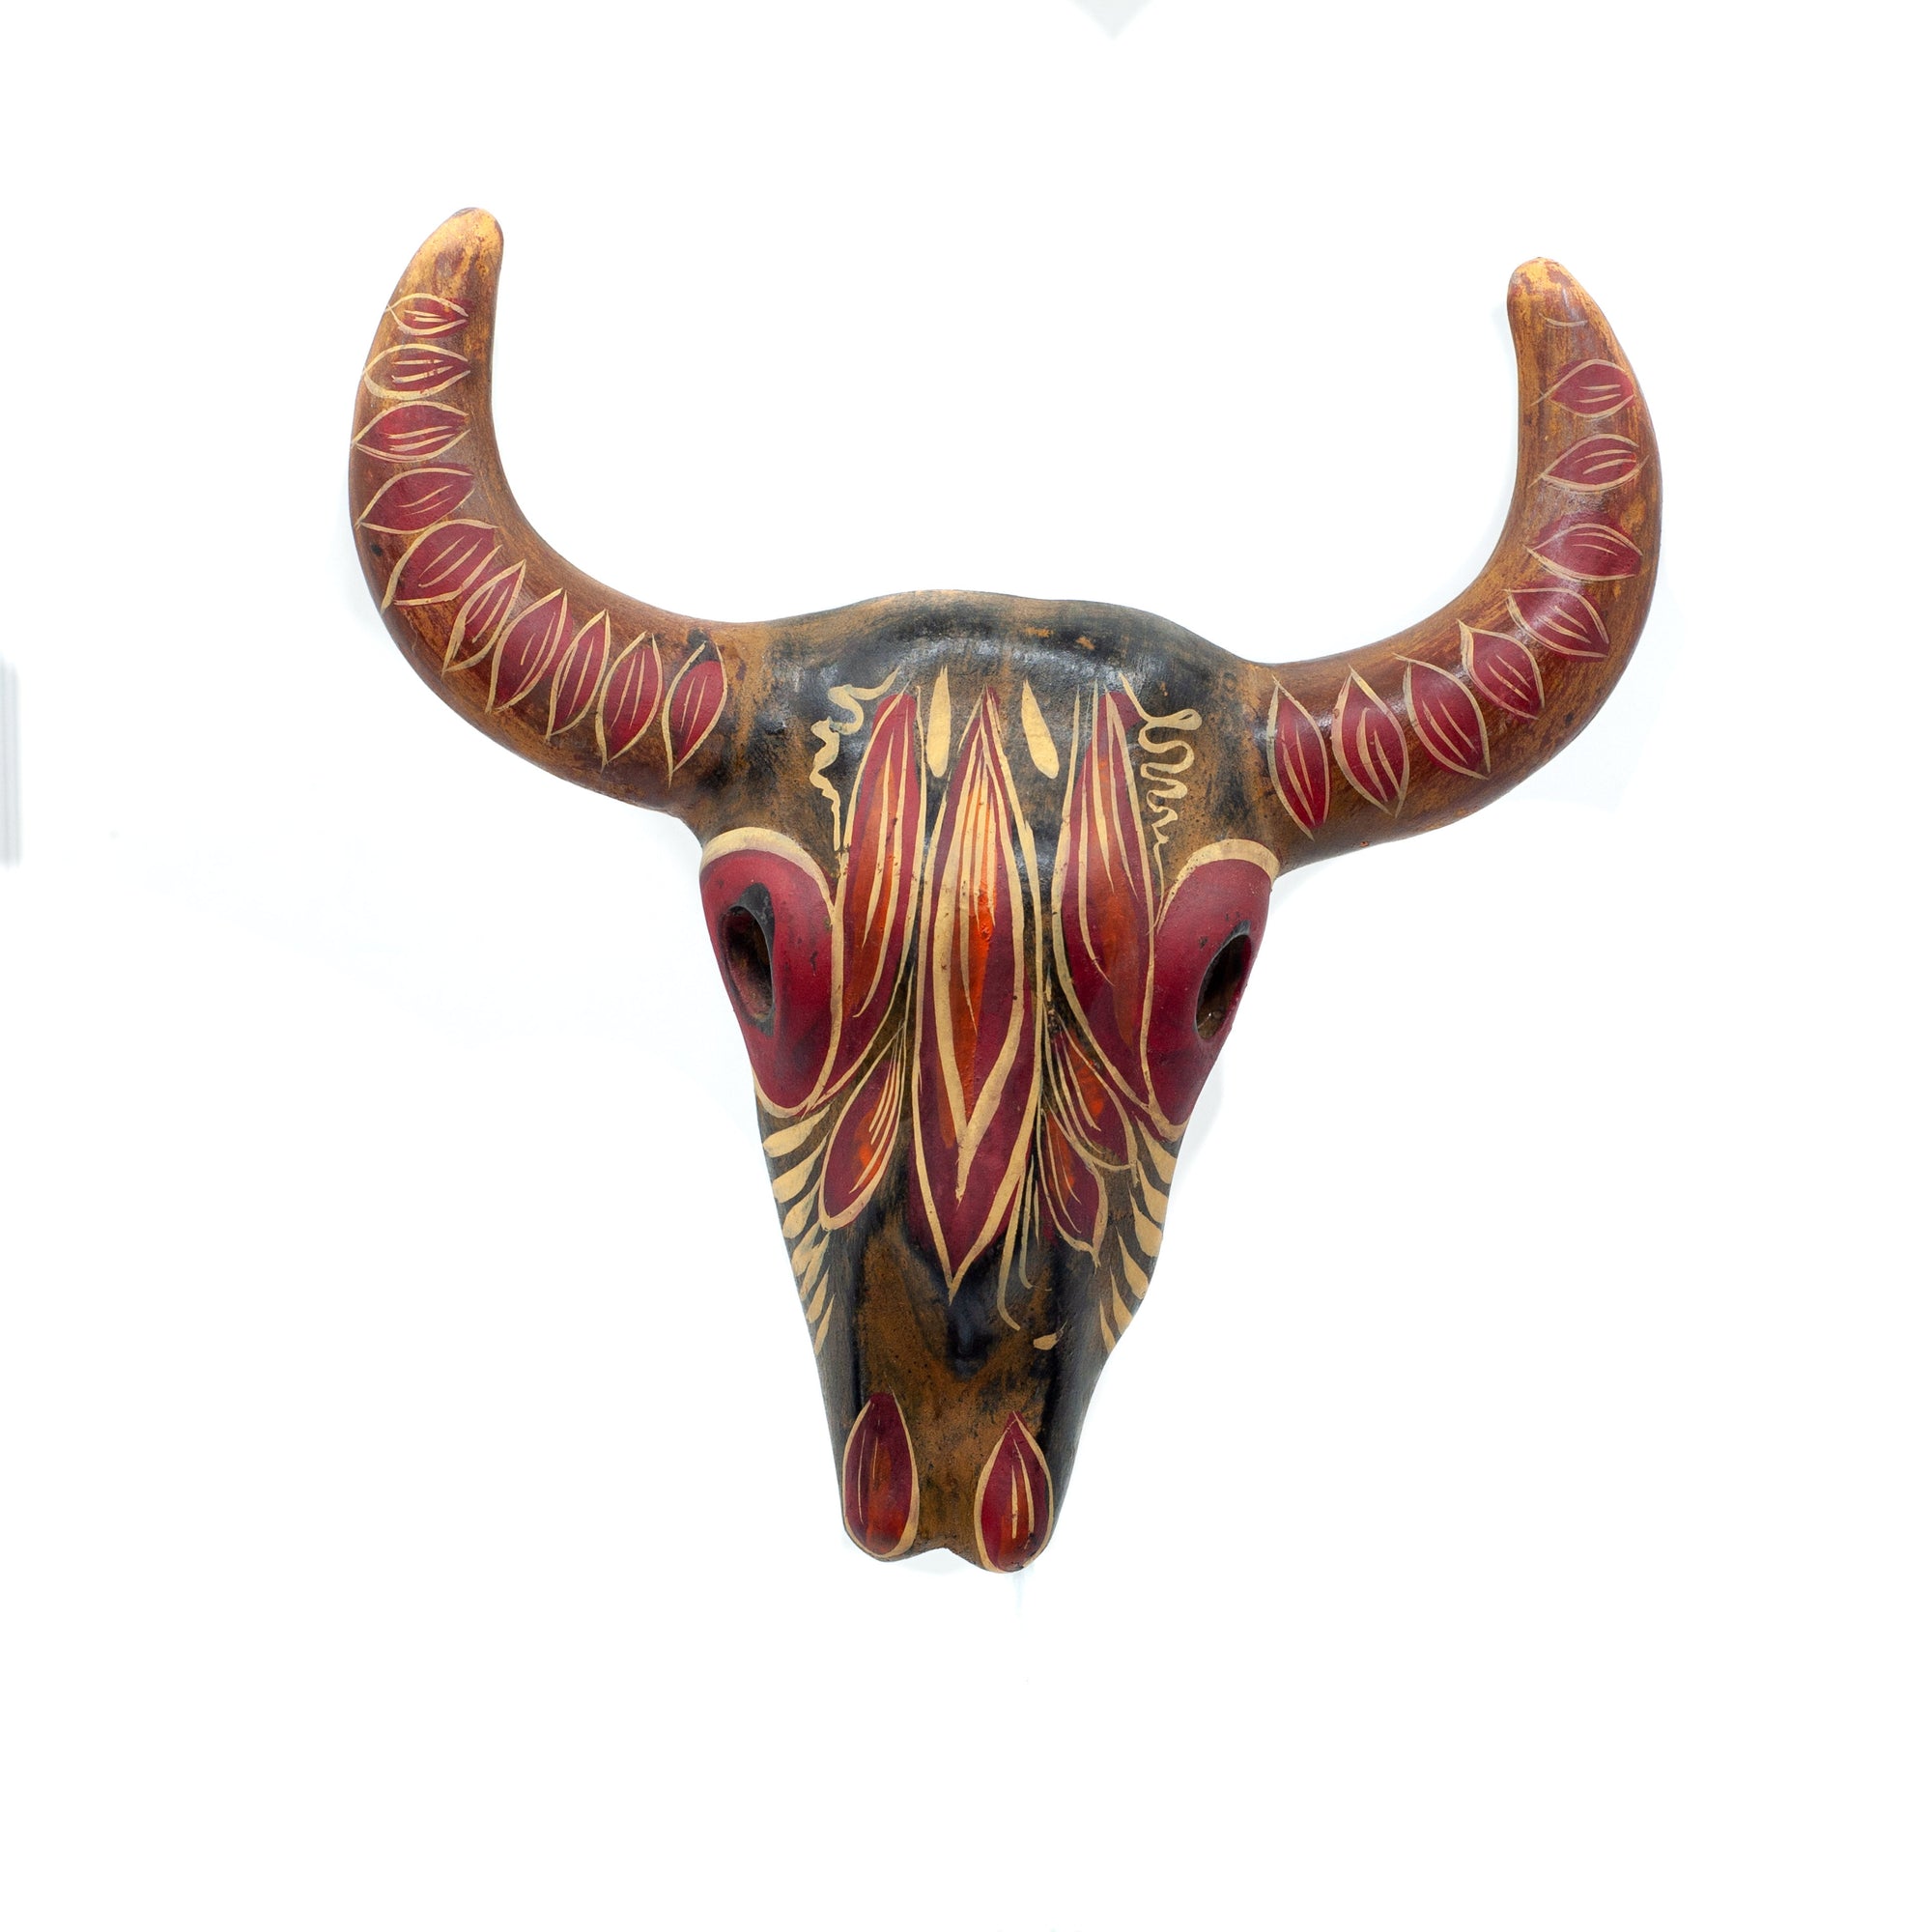 Photo of small terracotta cow skull with handpainted designs